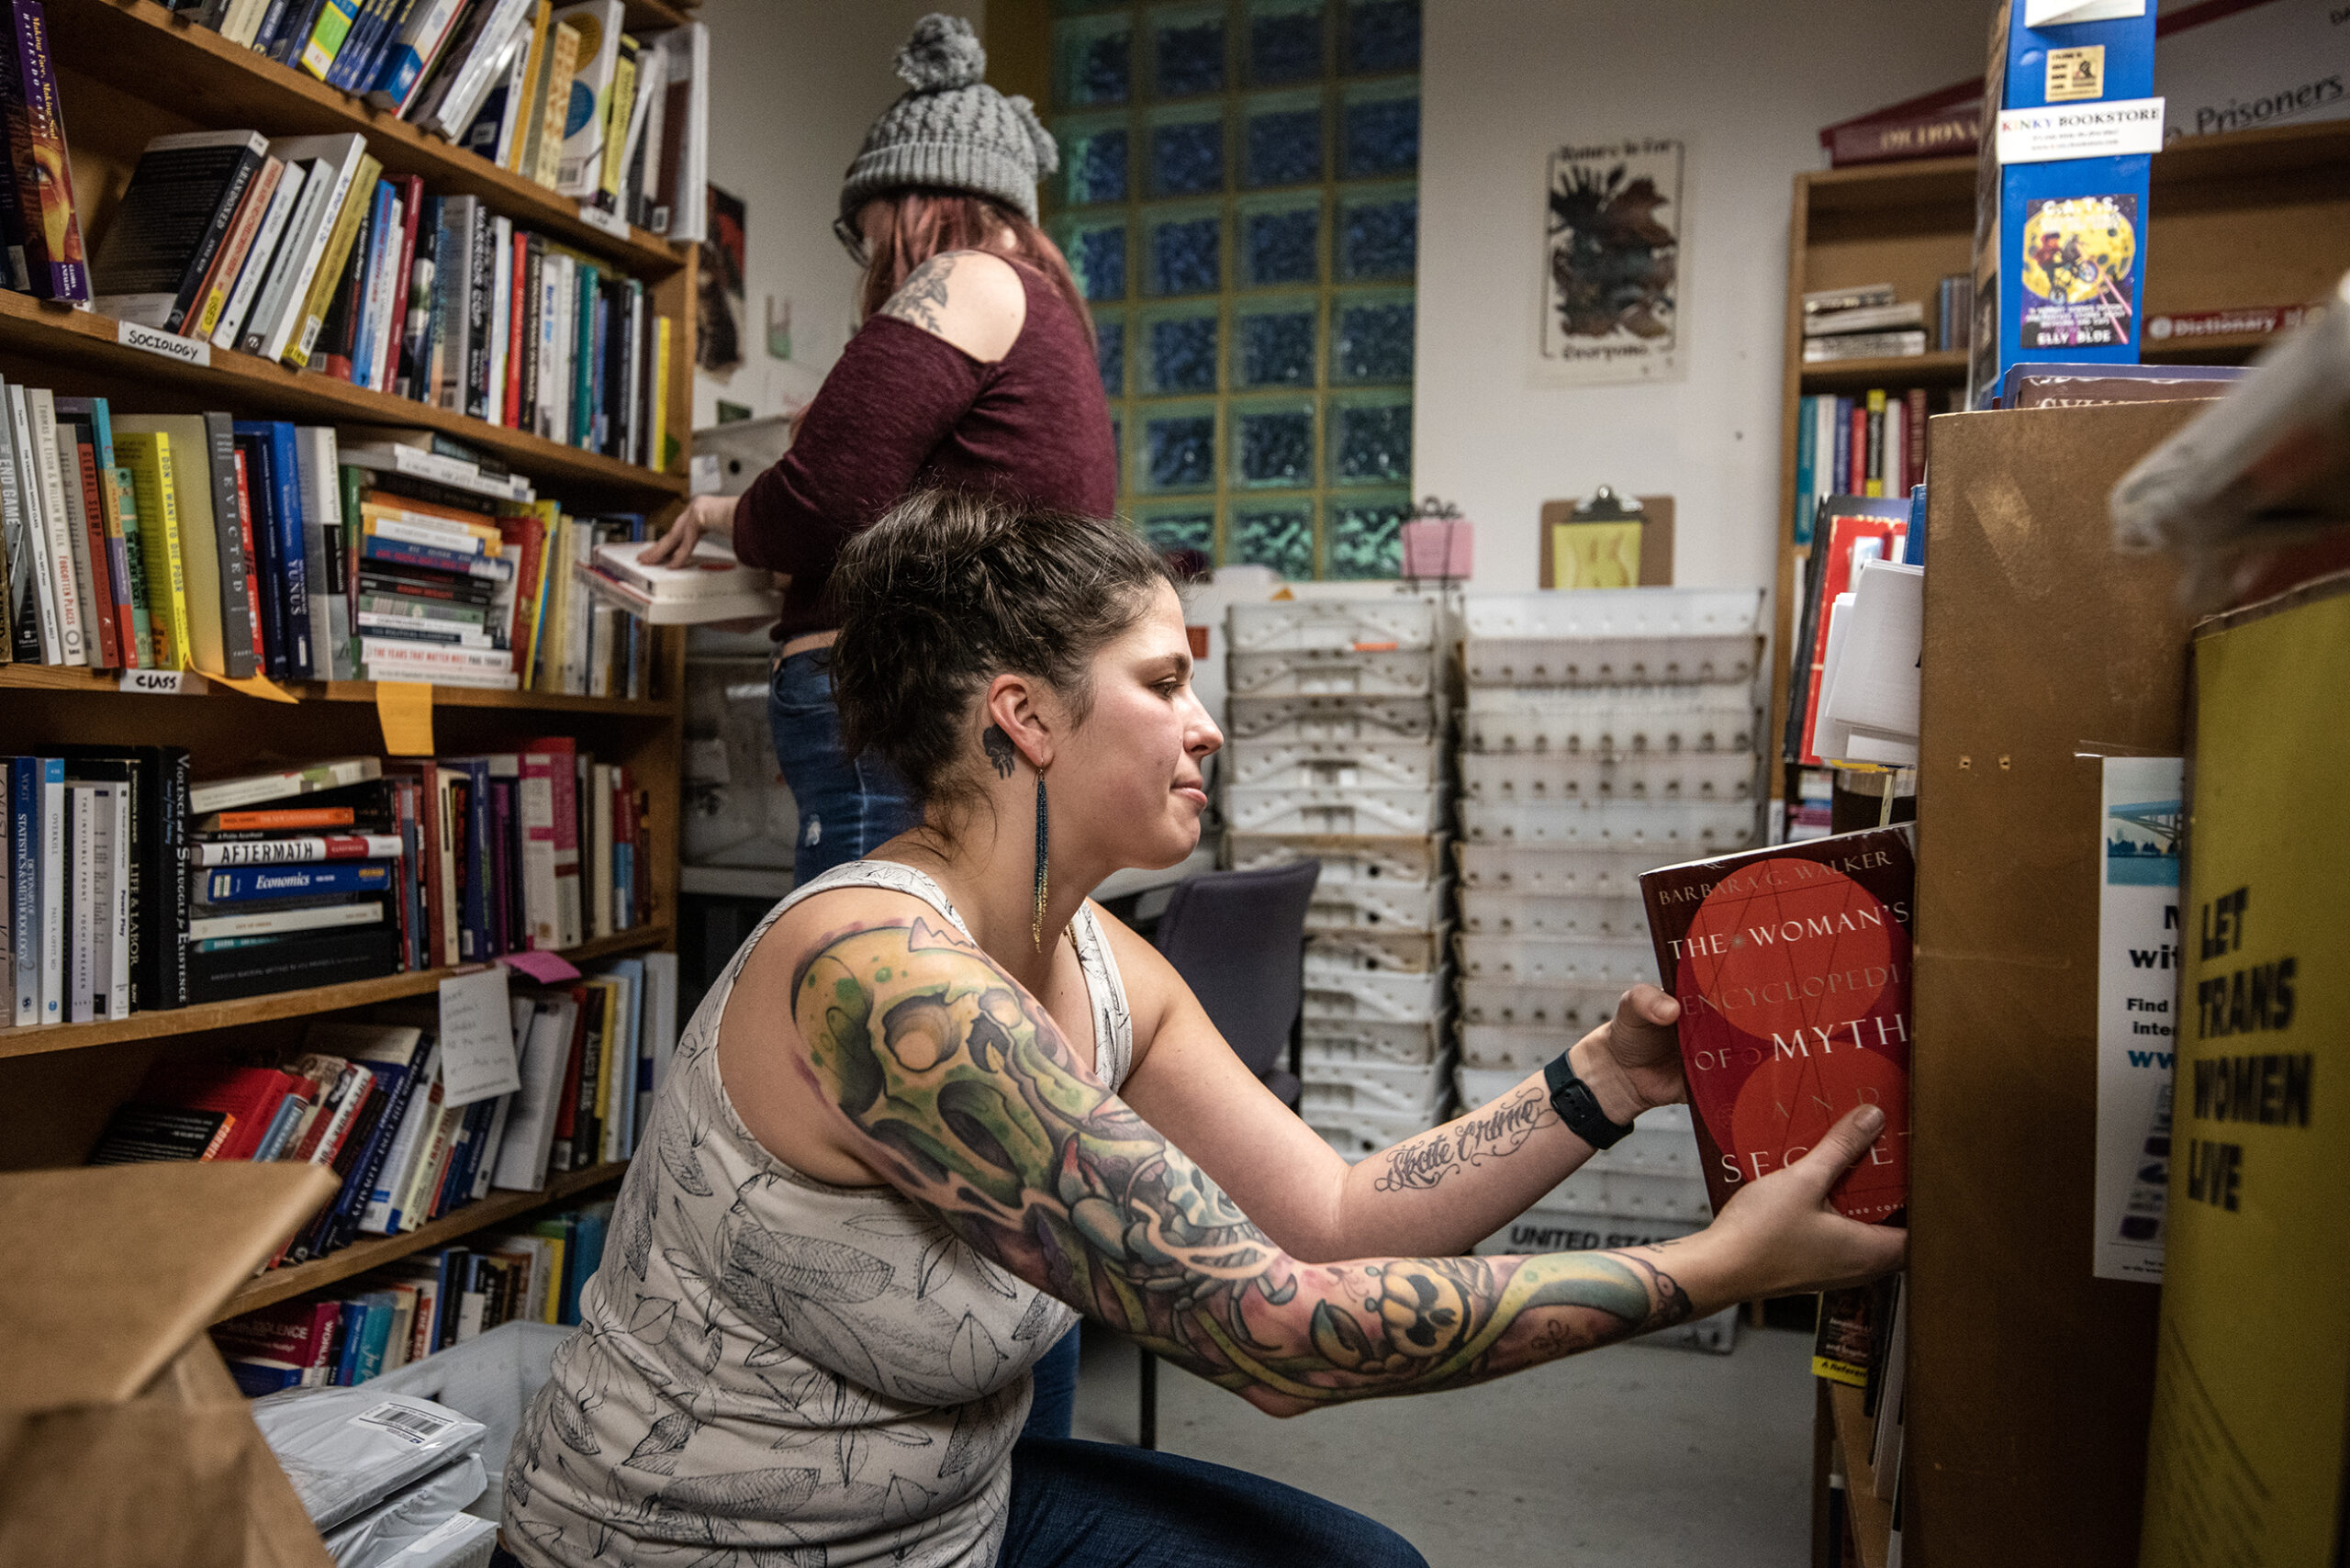 Two volunteers go through bookshelves filled with books.